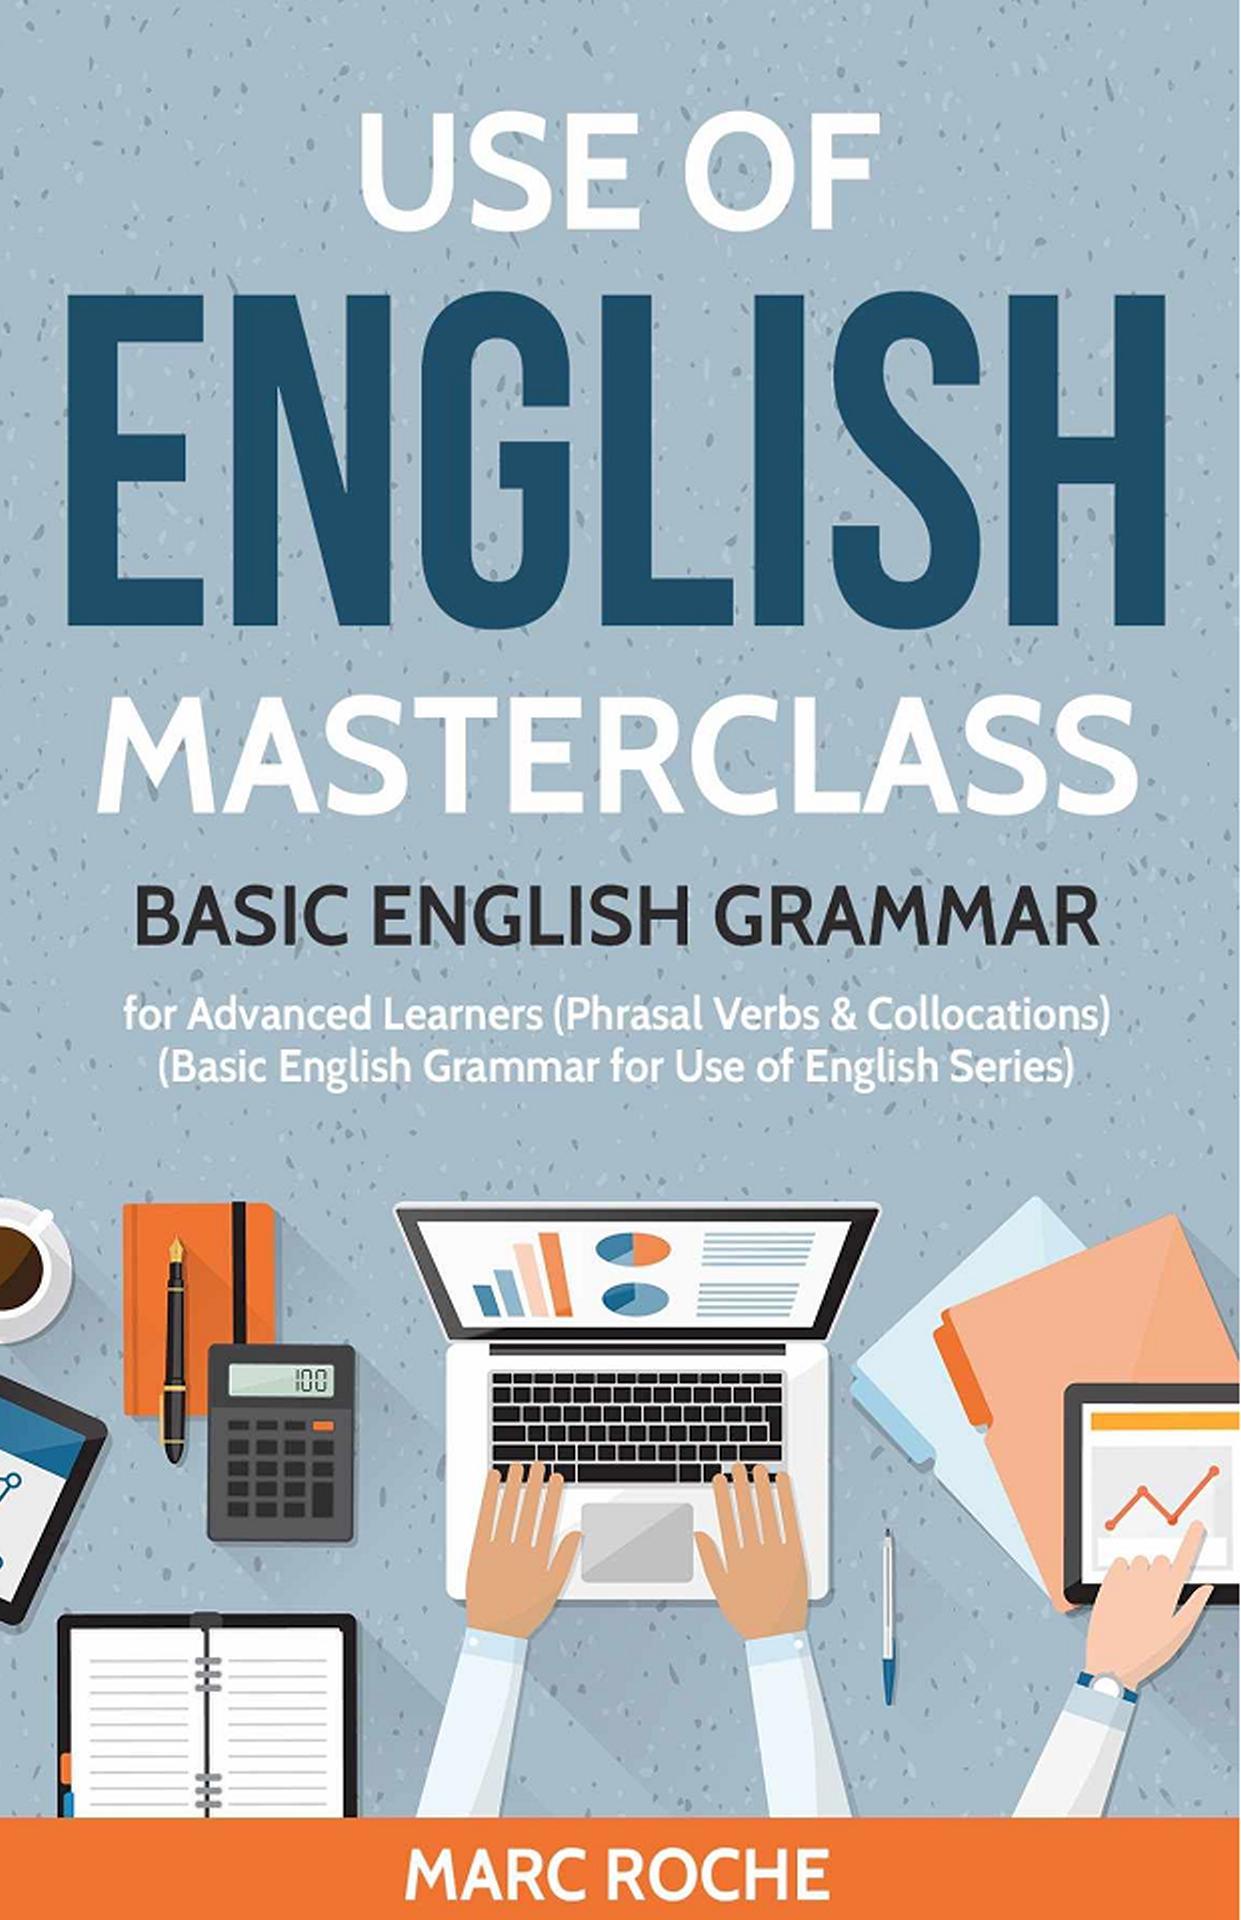 Use of English Masterclass, Basic English Grammar for Advanced Learners, Roche M., 2019